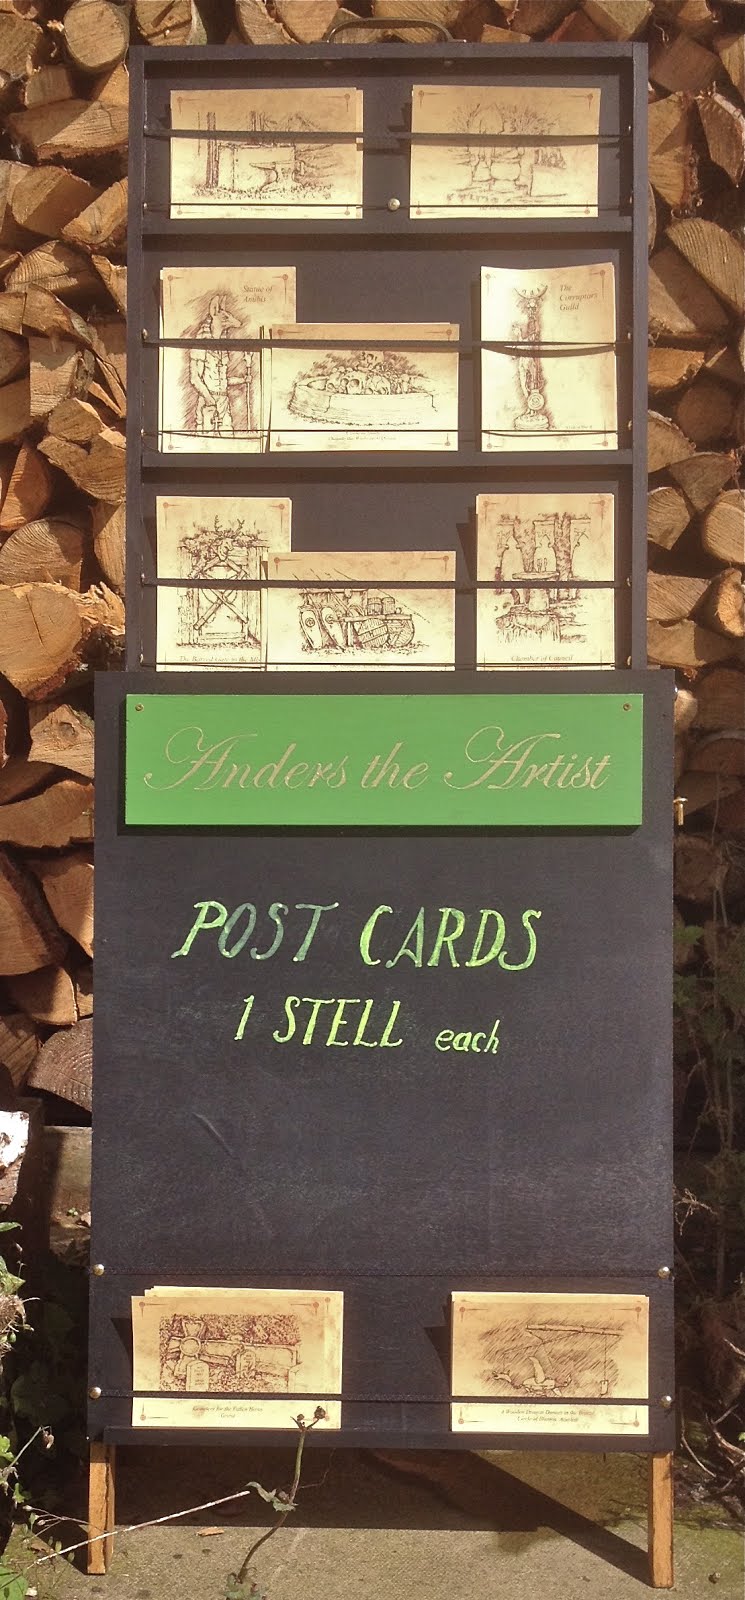 Postcards by Anders